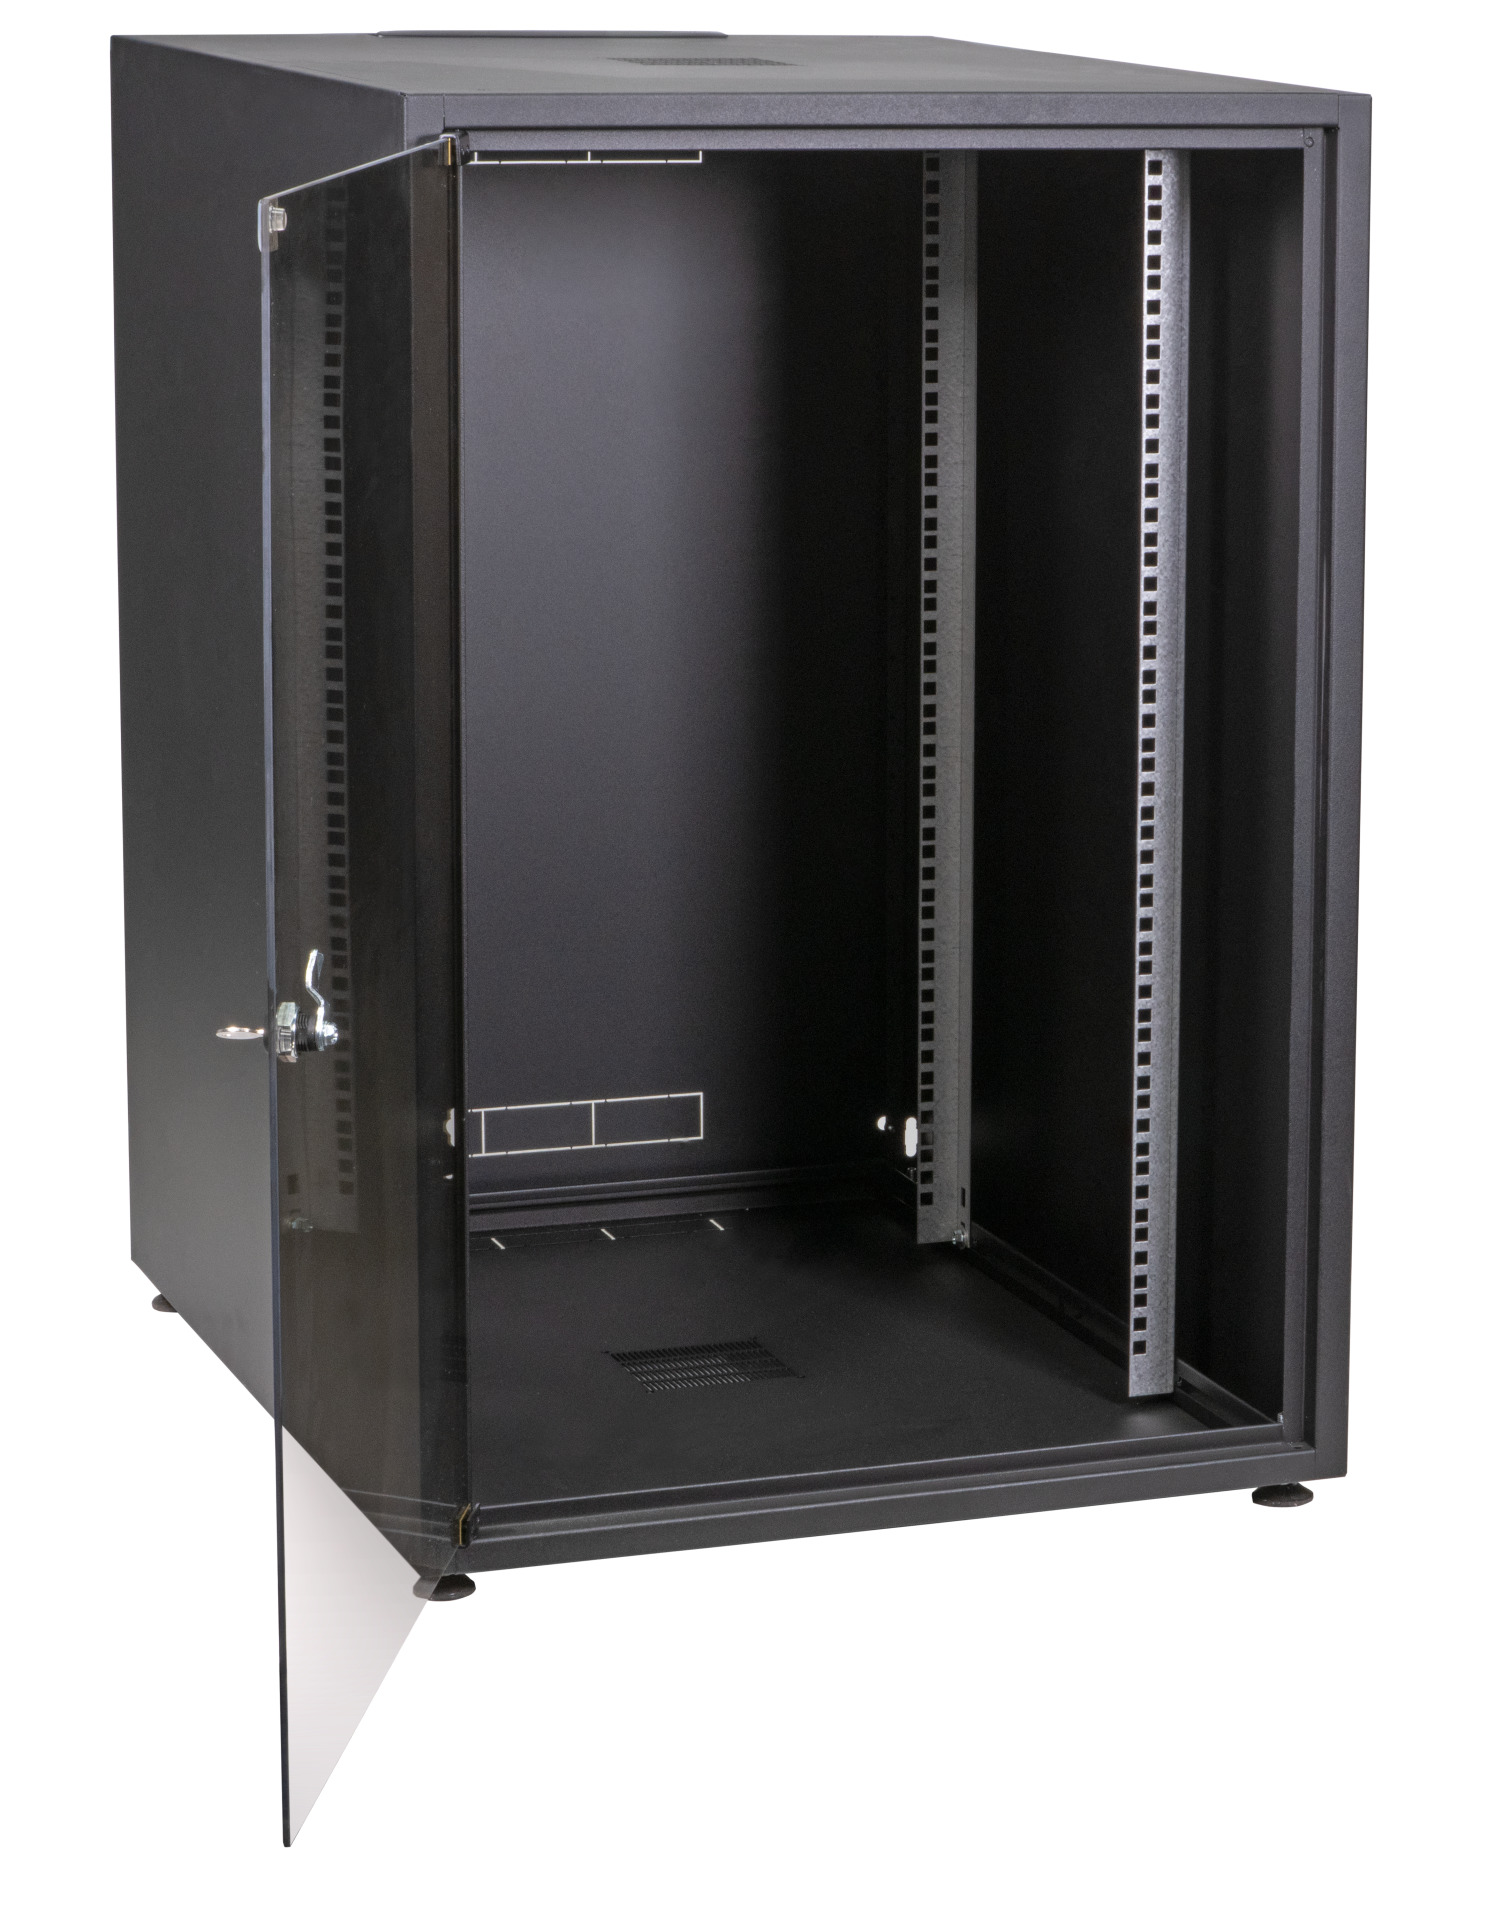 Network Cabinet OFFICE 15U, 600x600 mm, RAL9005